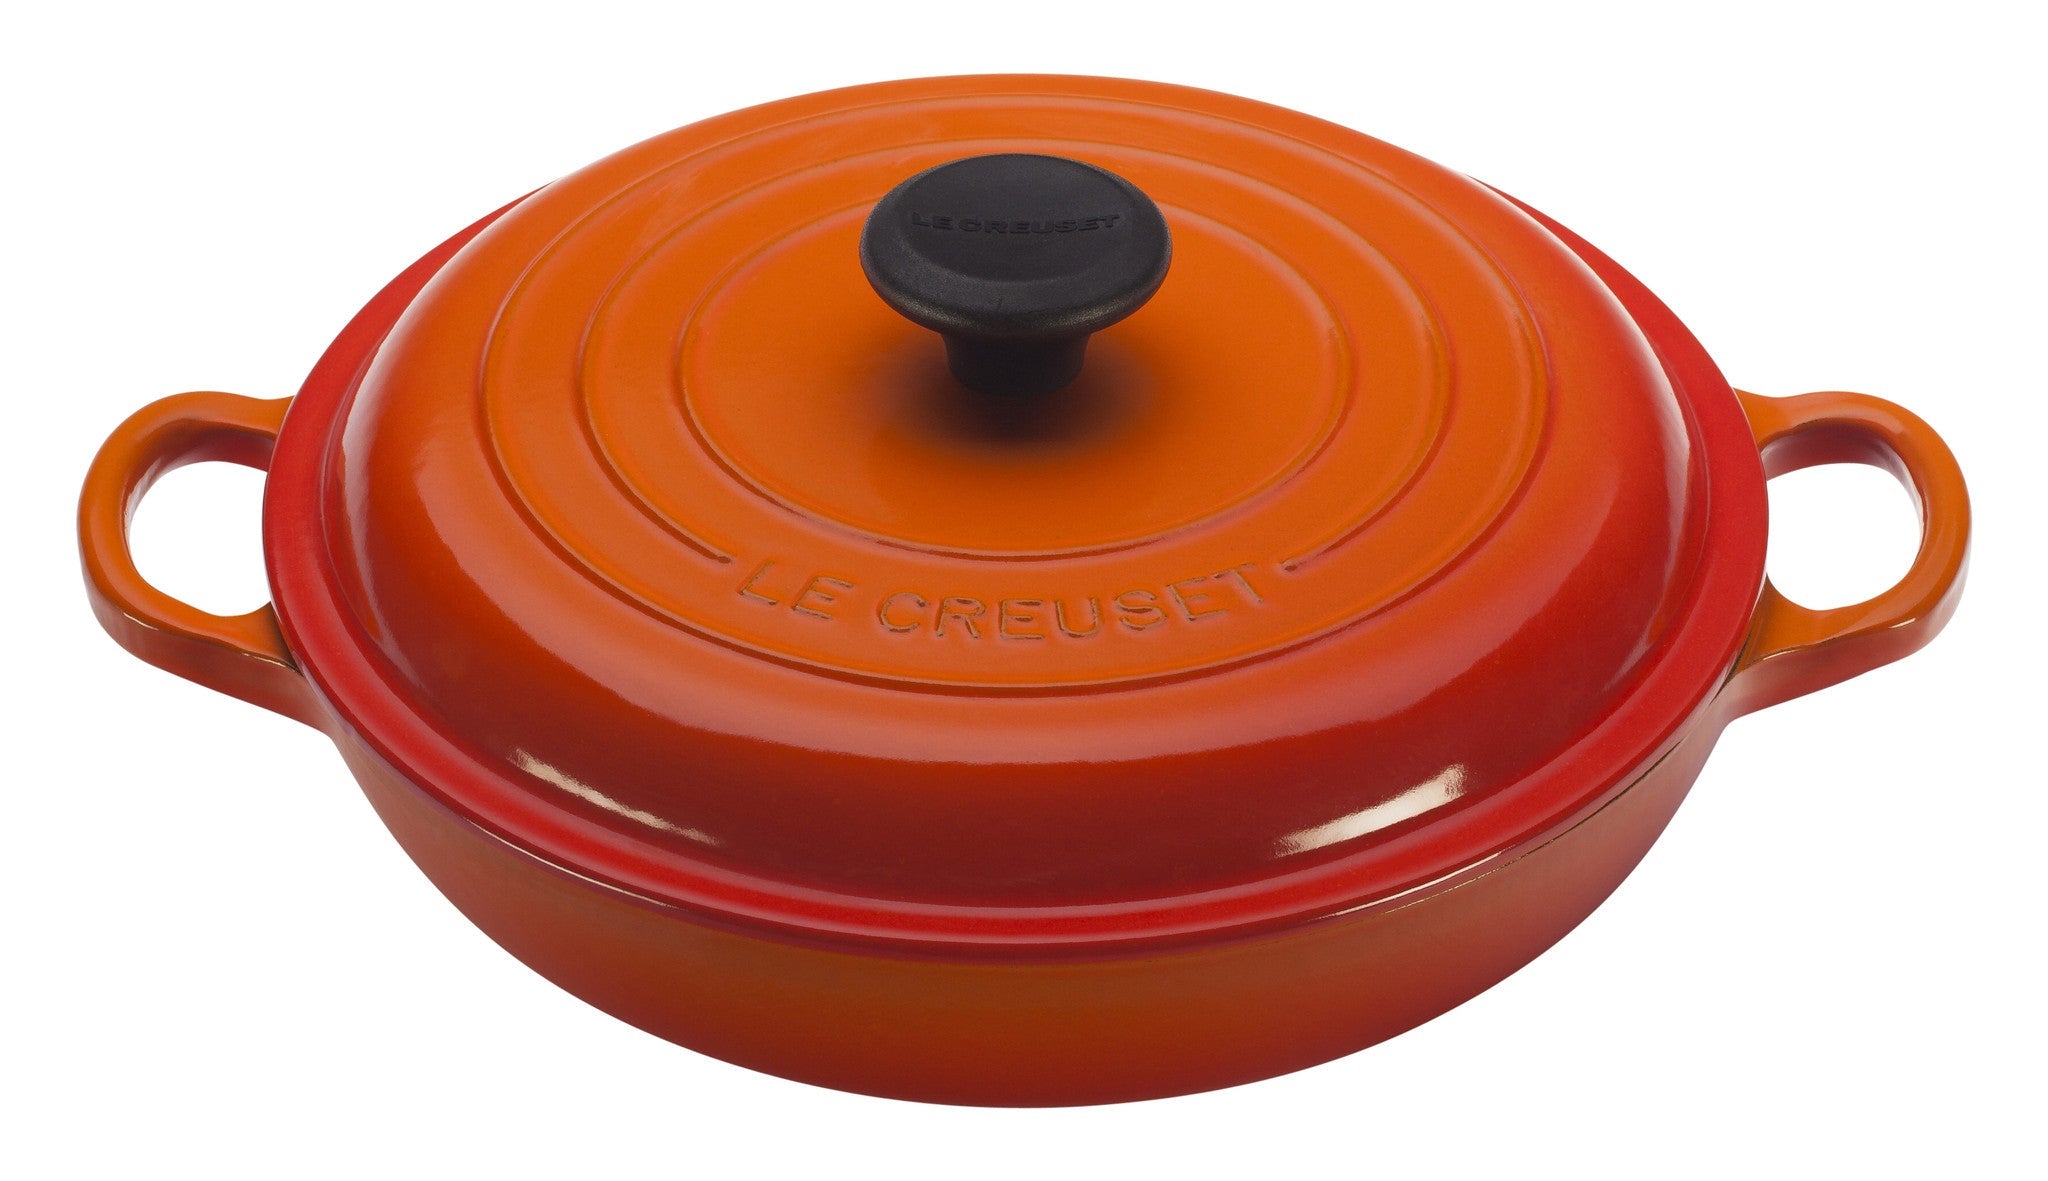 How To Clean Le Creuset Cookware – Crisbee Cast Iron Seasoning